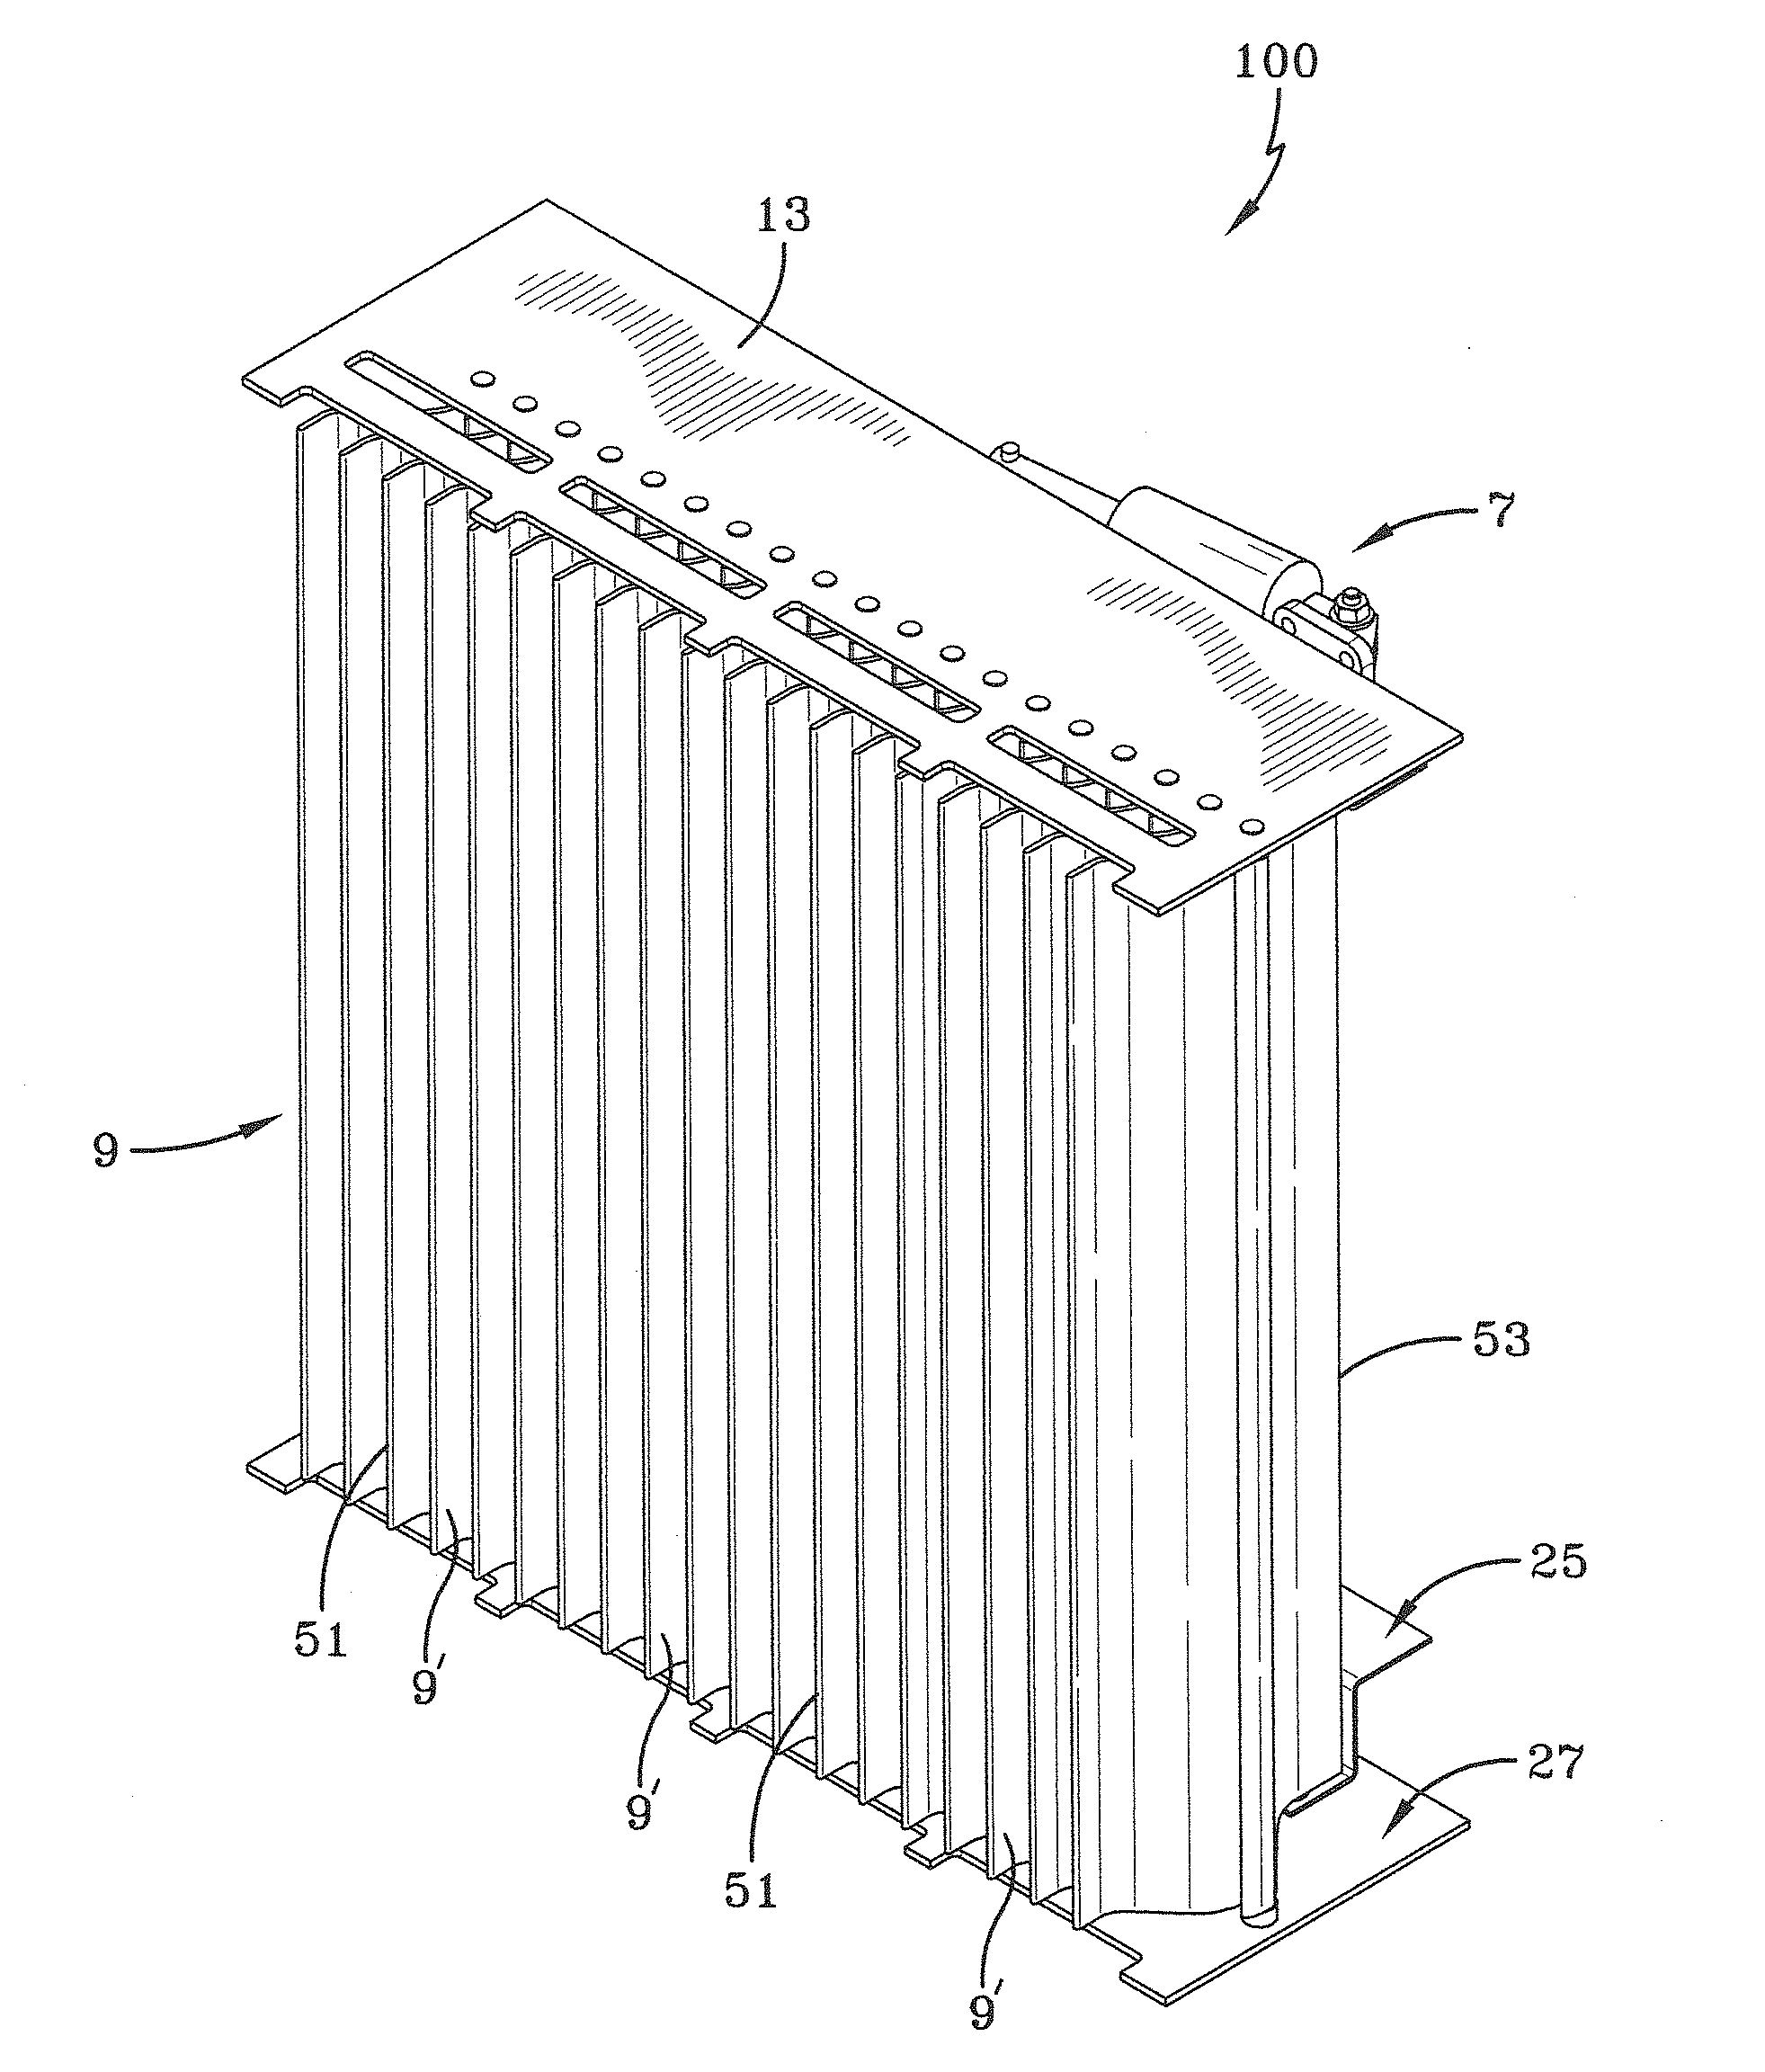 Louver device for removing moisture and dust